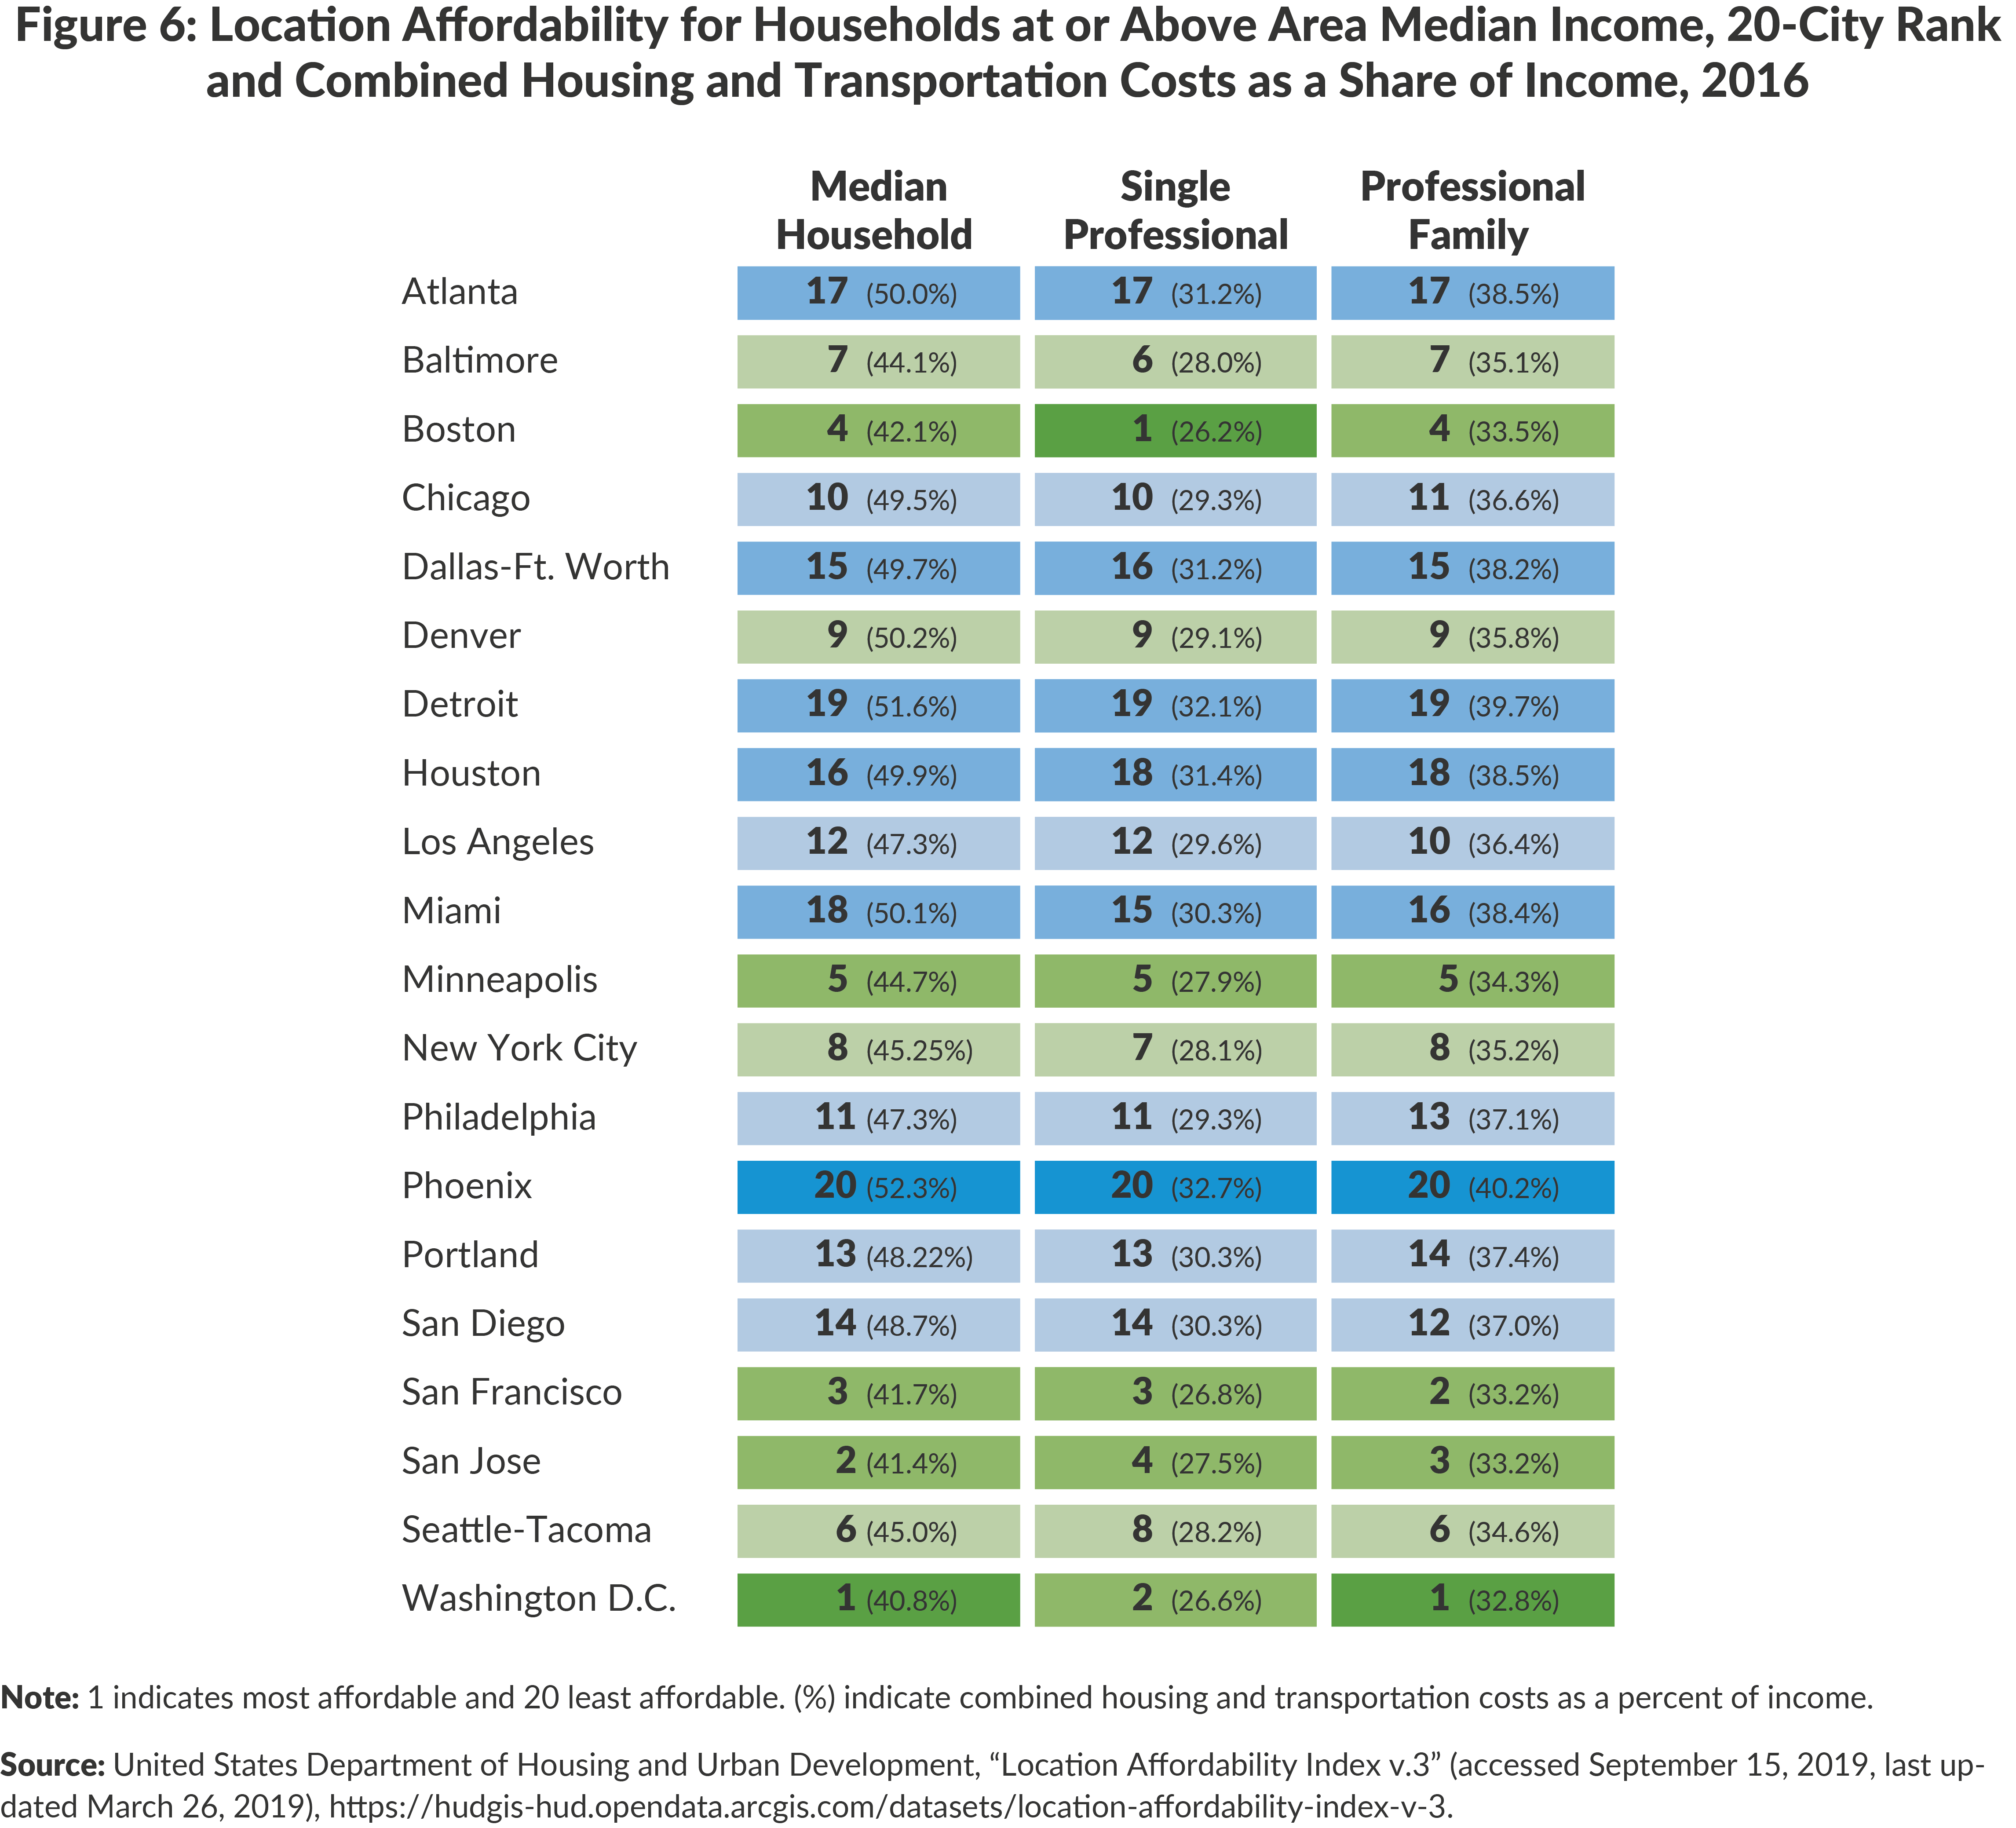 Figure 6. Location Affordability for Households at or Above Area Median Income, 20-City Rank and Combined Housing and Transportation Costs as a Share of Income, 2016